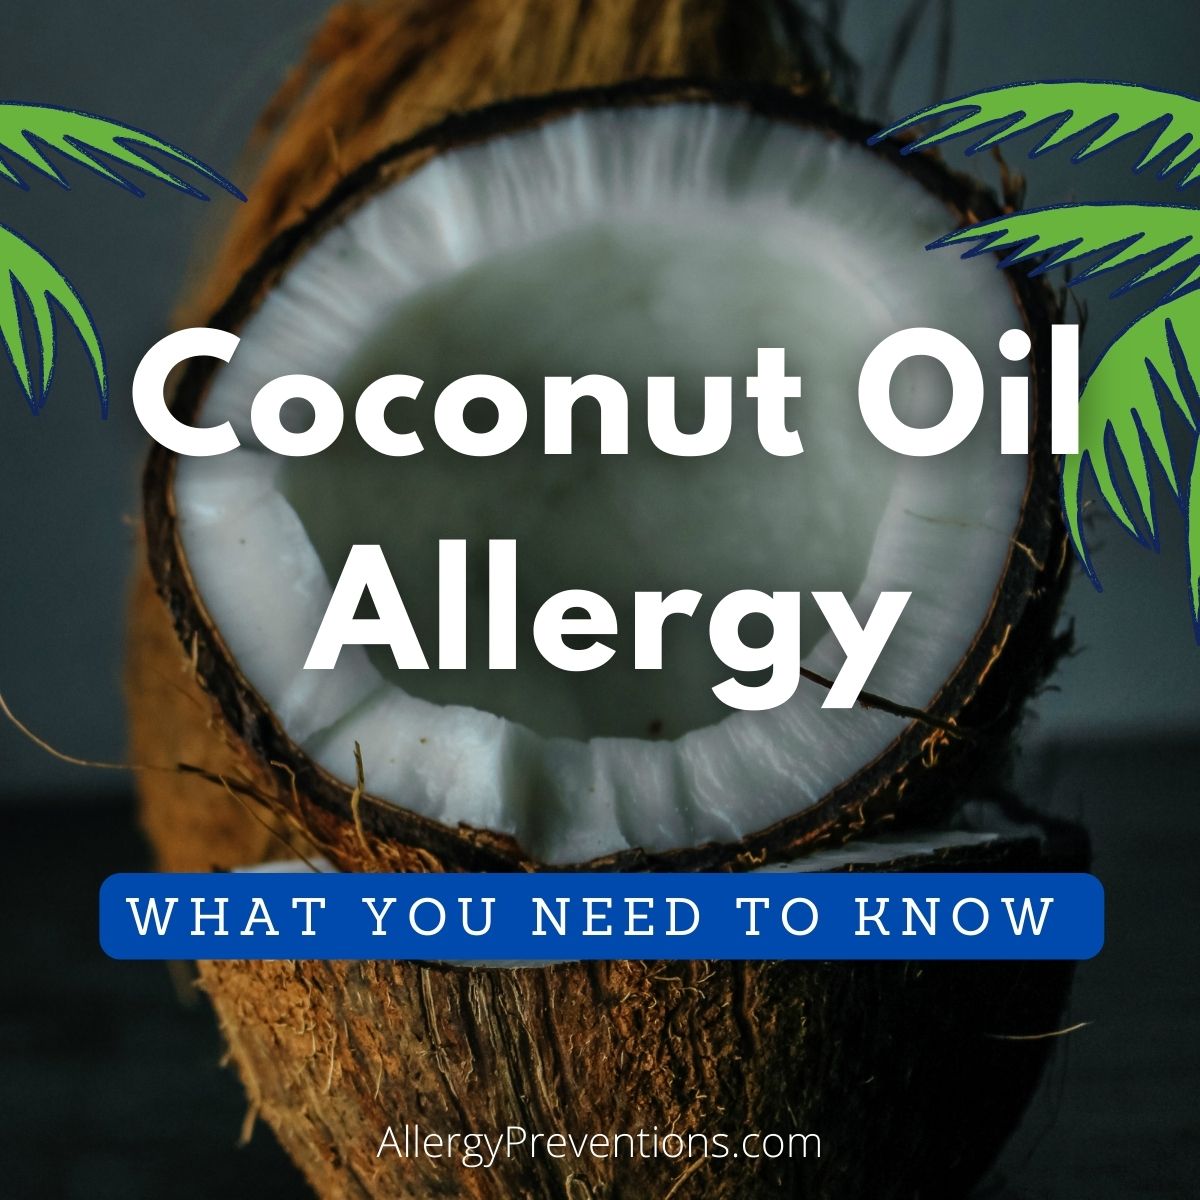 Coconut Oil Allergy: What You Need to Know